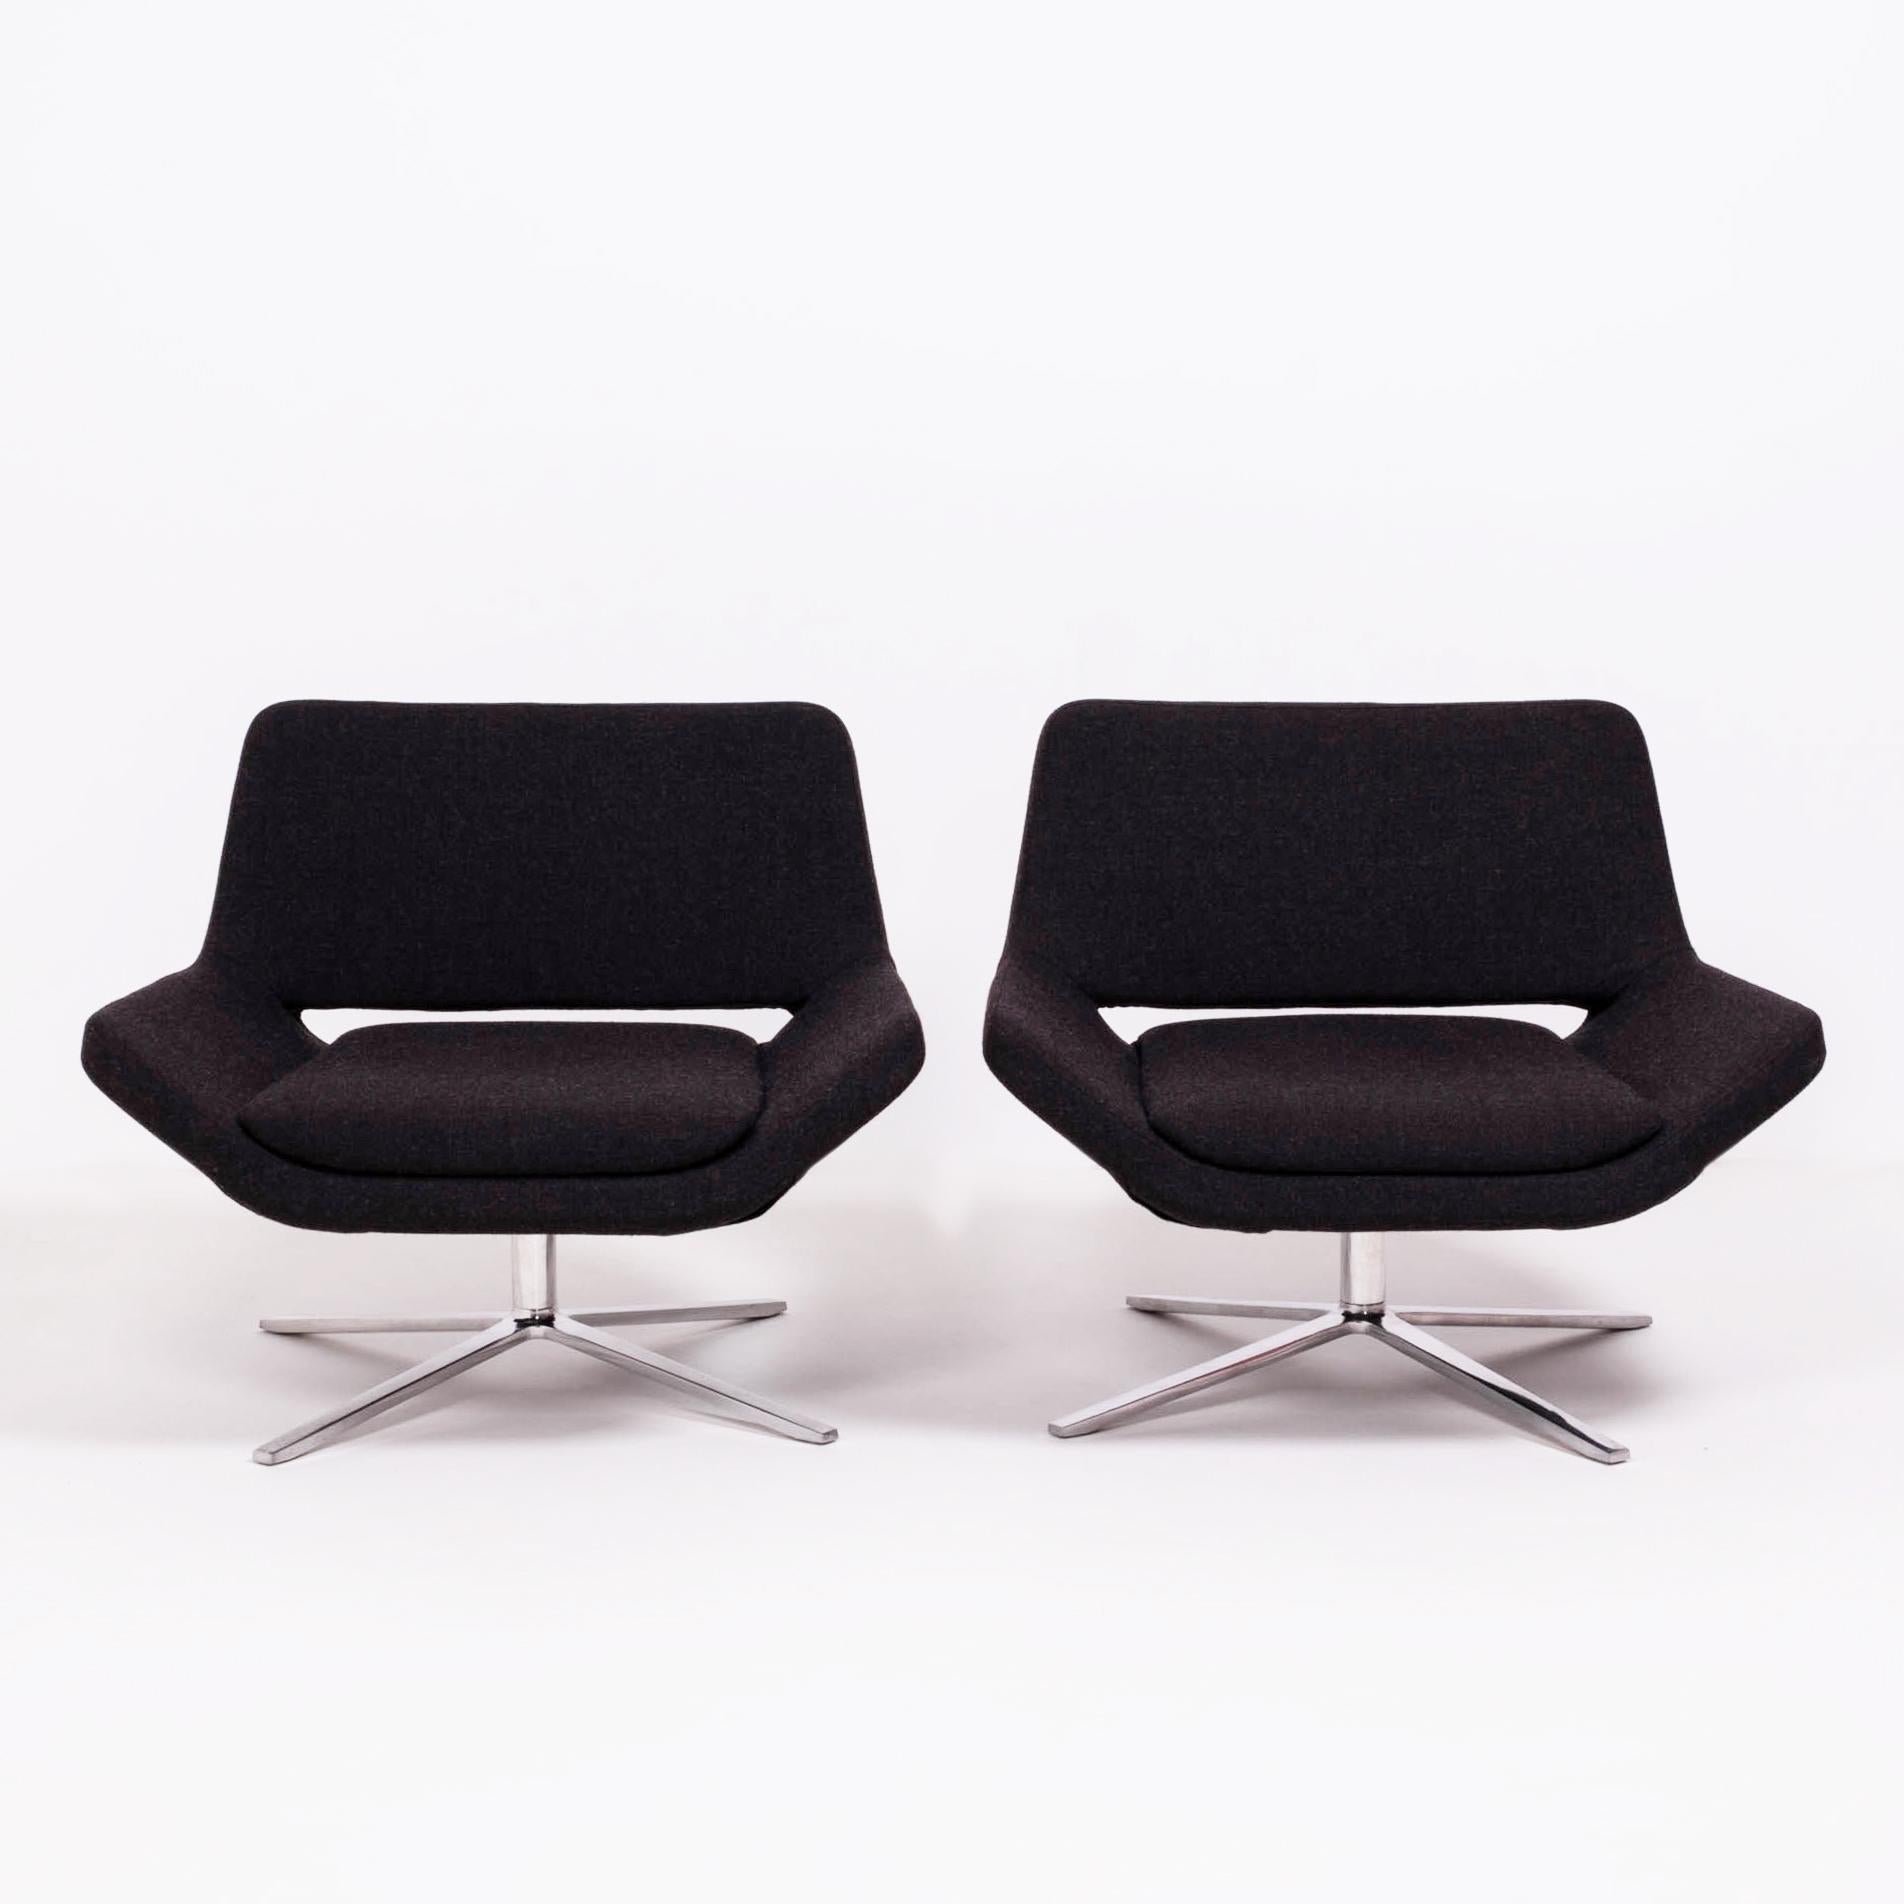 Originally designed in 2002 by Jeffrey Bernett for B&B Italia, this pair of Metropolitan armchairs have a sleek, modernist aesthetic. 

Fully upholstered in dark grey fabric, the armchairs feature seats that flow uninterruptedly into angular arm